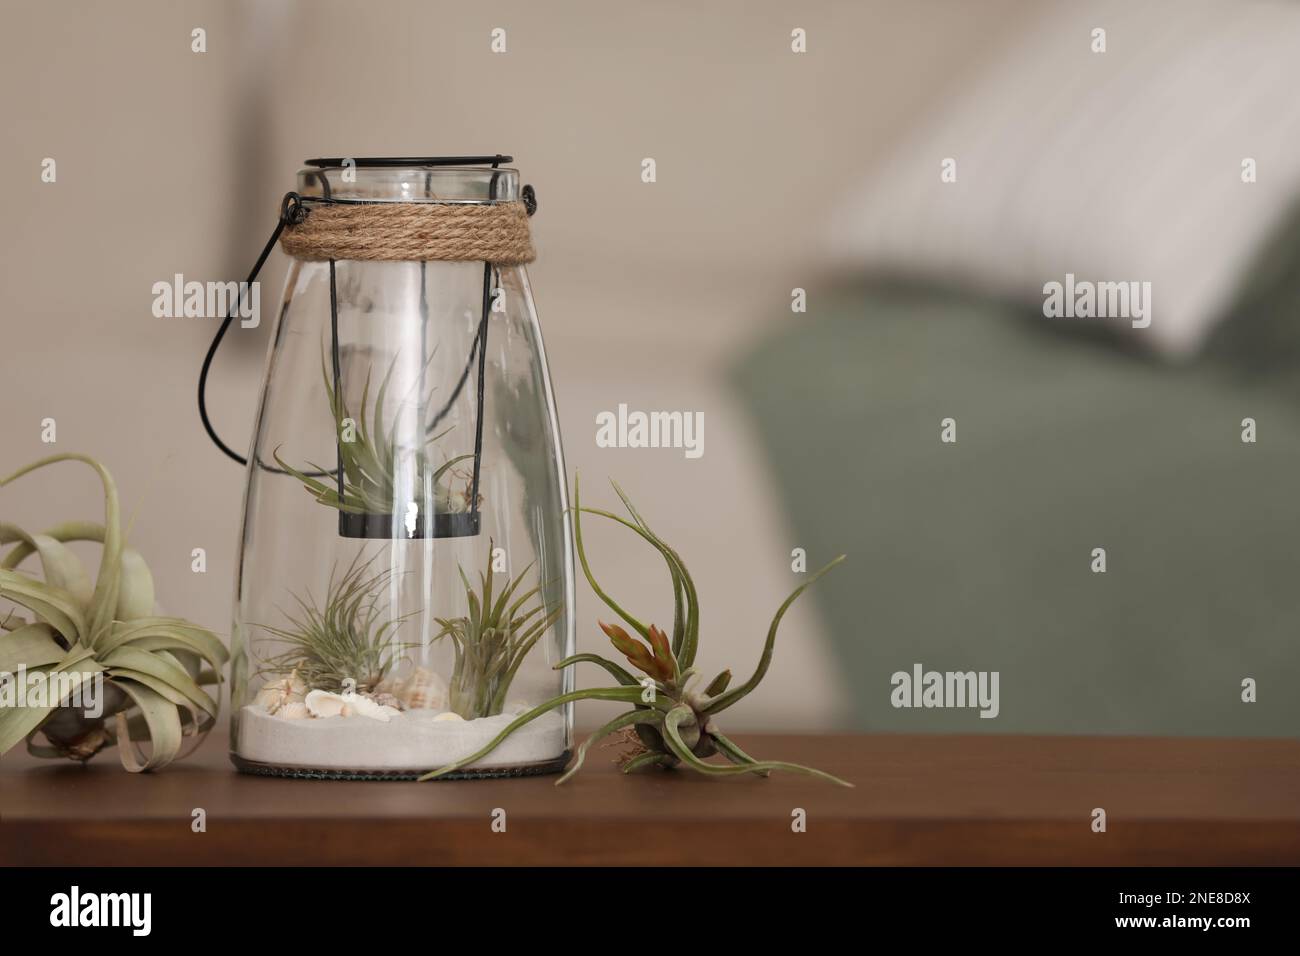 Different tillandsia plants and florarium on wooden table indoors, space for text. House decor Stock Photo